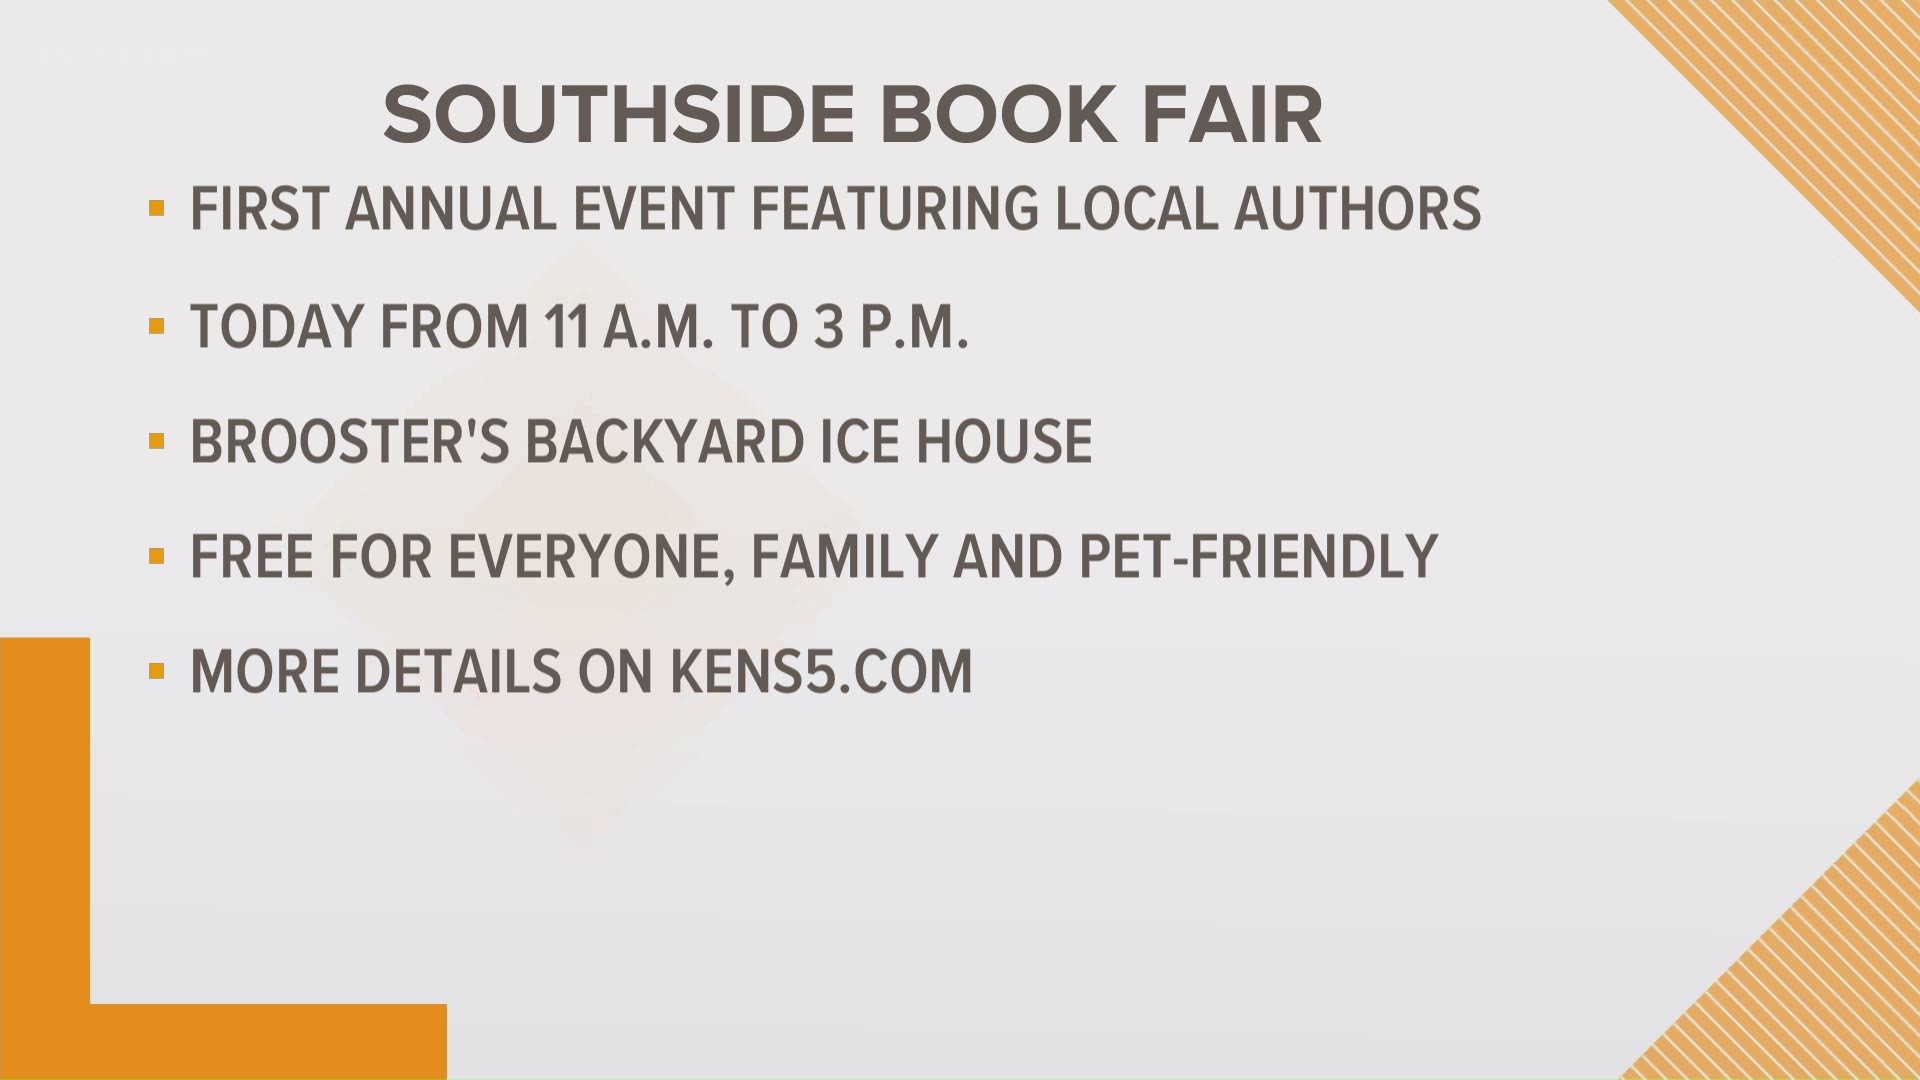 The first of its kind book fair will showcase local authors as well as Texas writers. The idea is to promote more reading and writing.